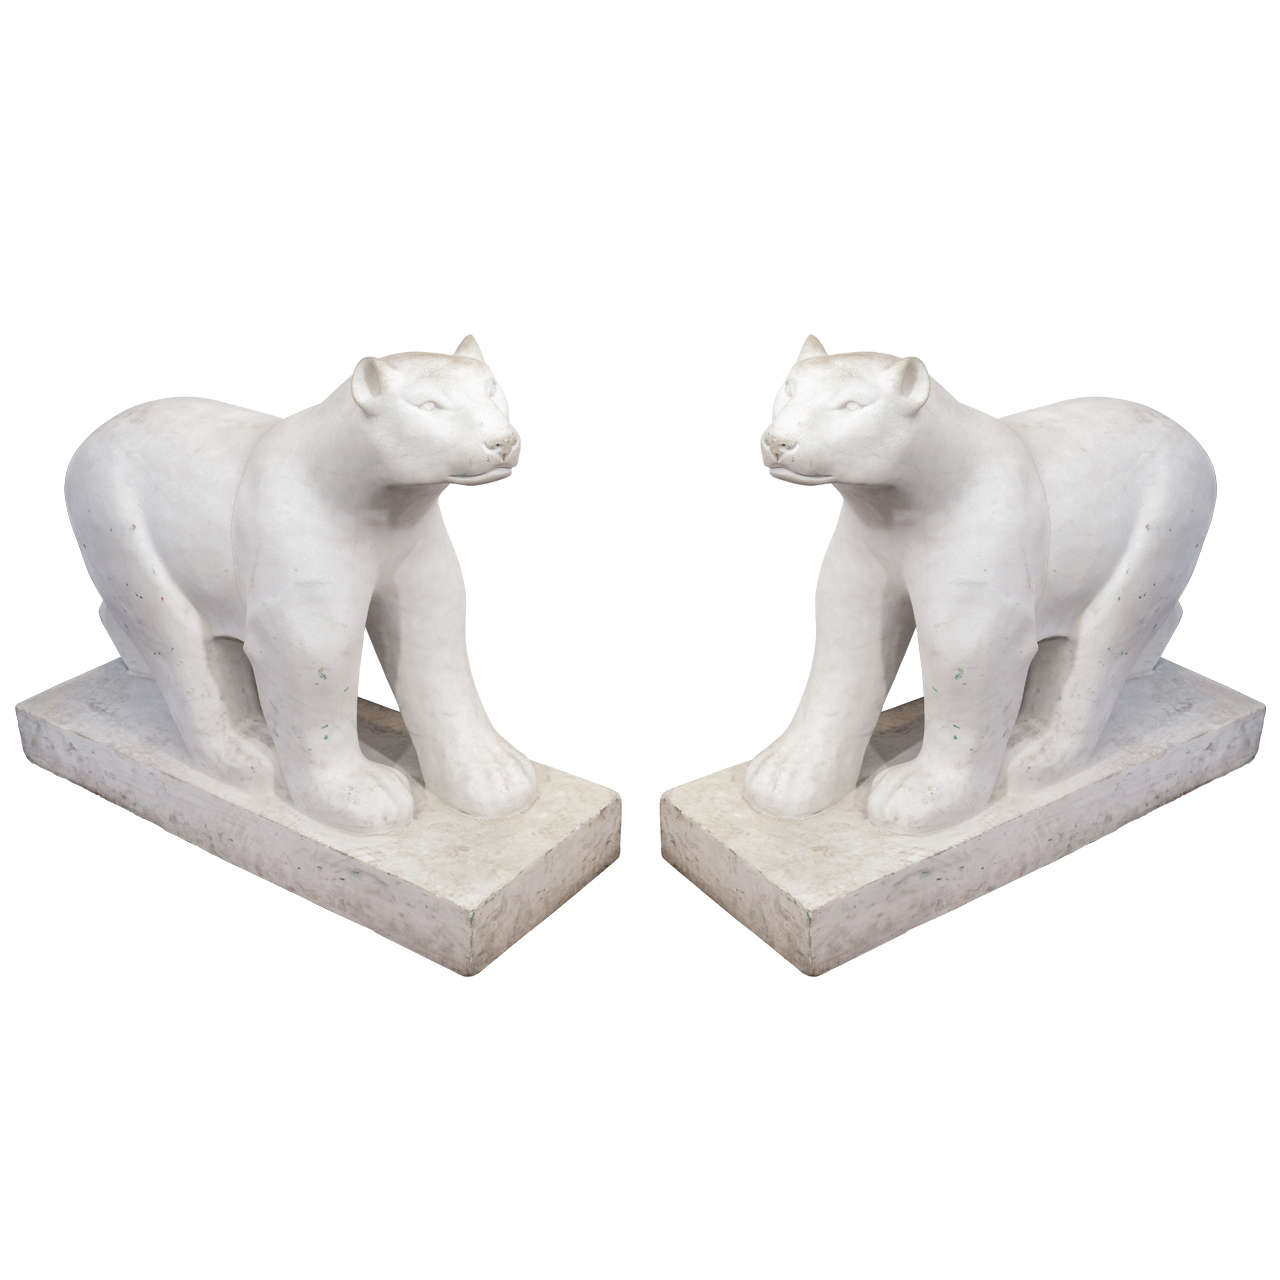 1980s Pair of Art Deco Style Polar Bears Carved from Statuary White Marble